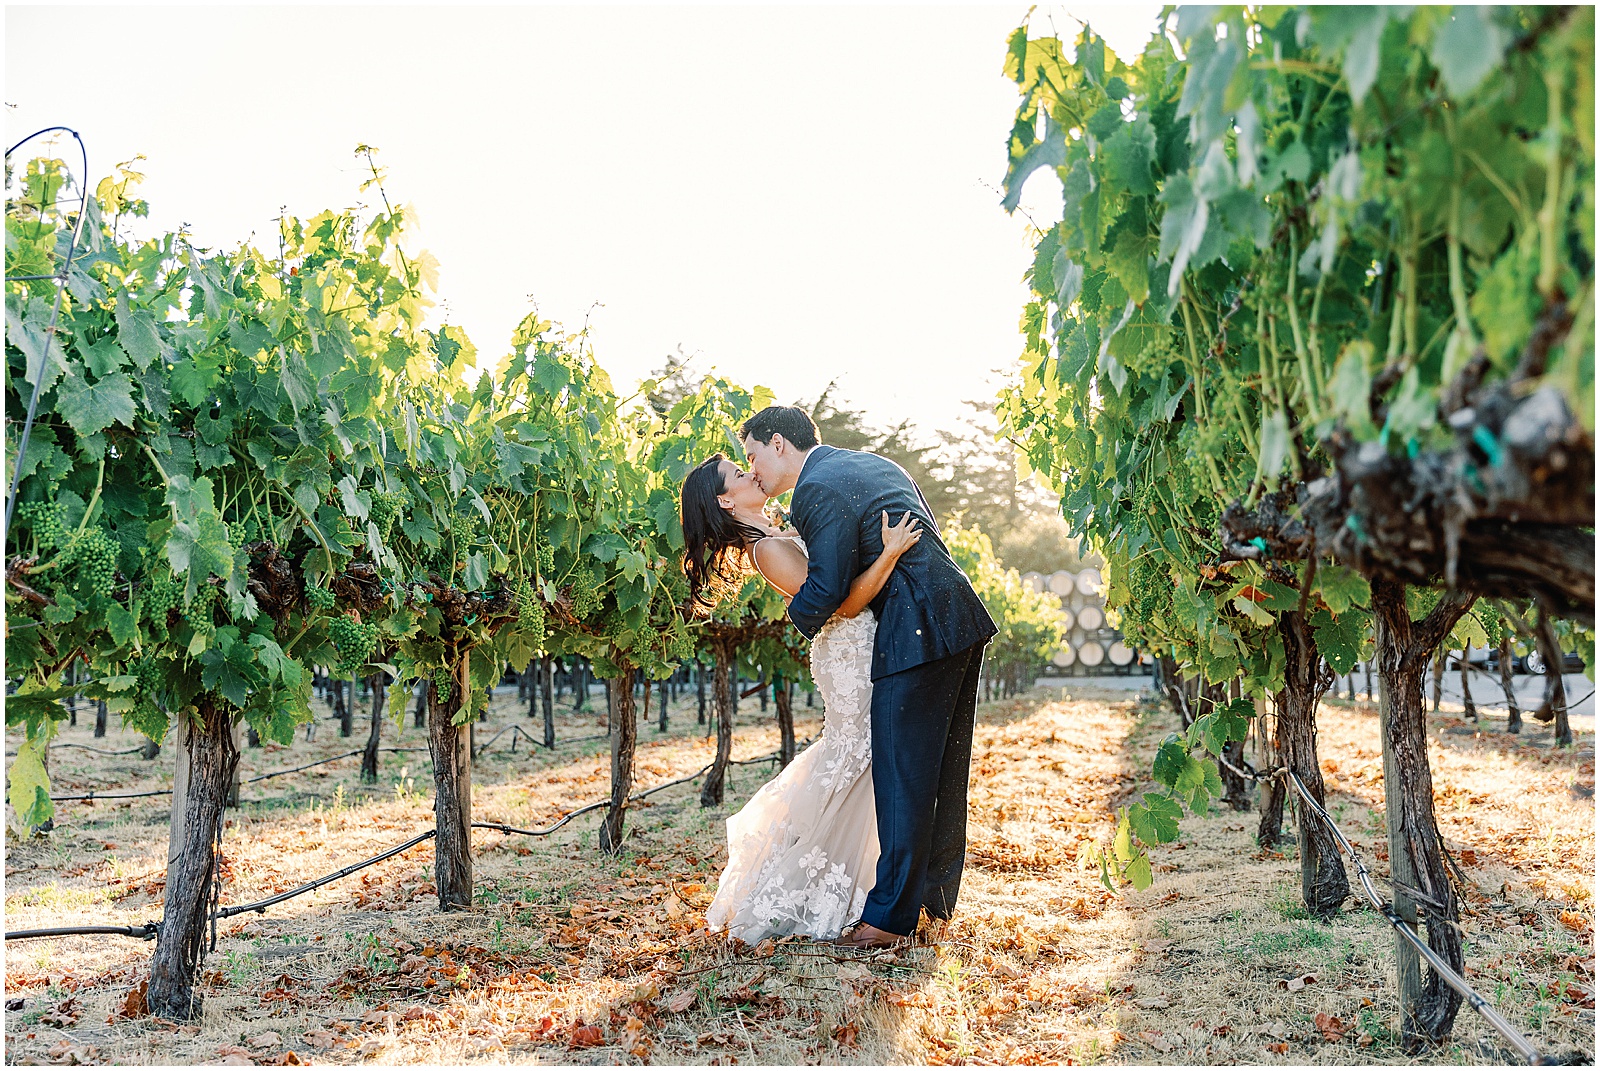 Newlyweds kissing in vineyards during Summer in California, by AGS Photo Art